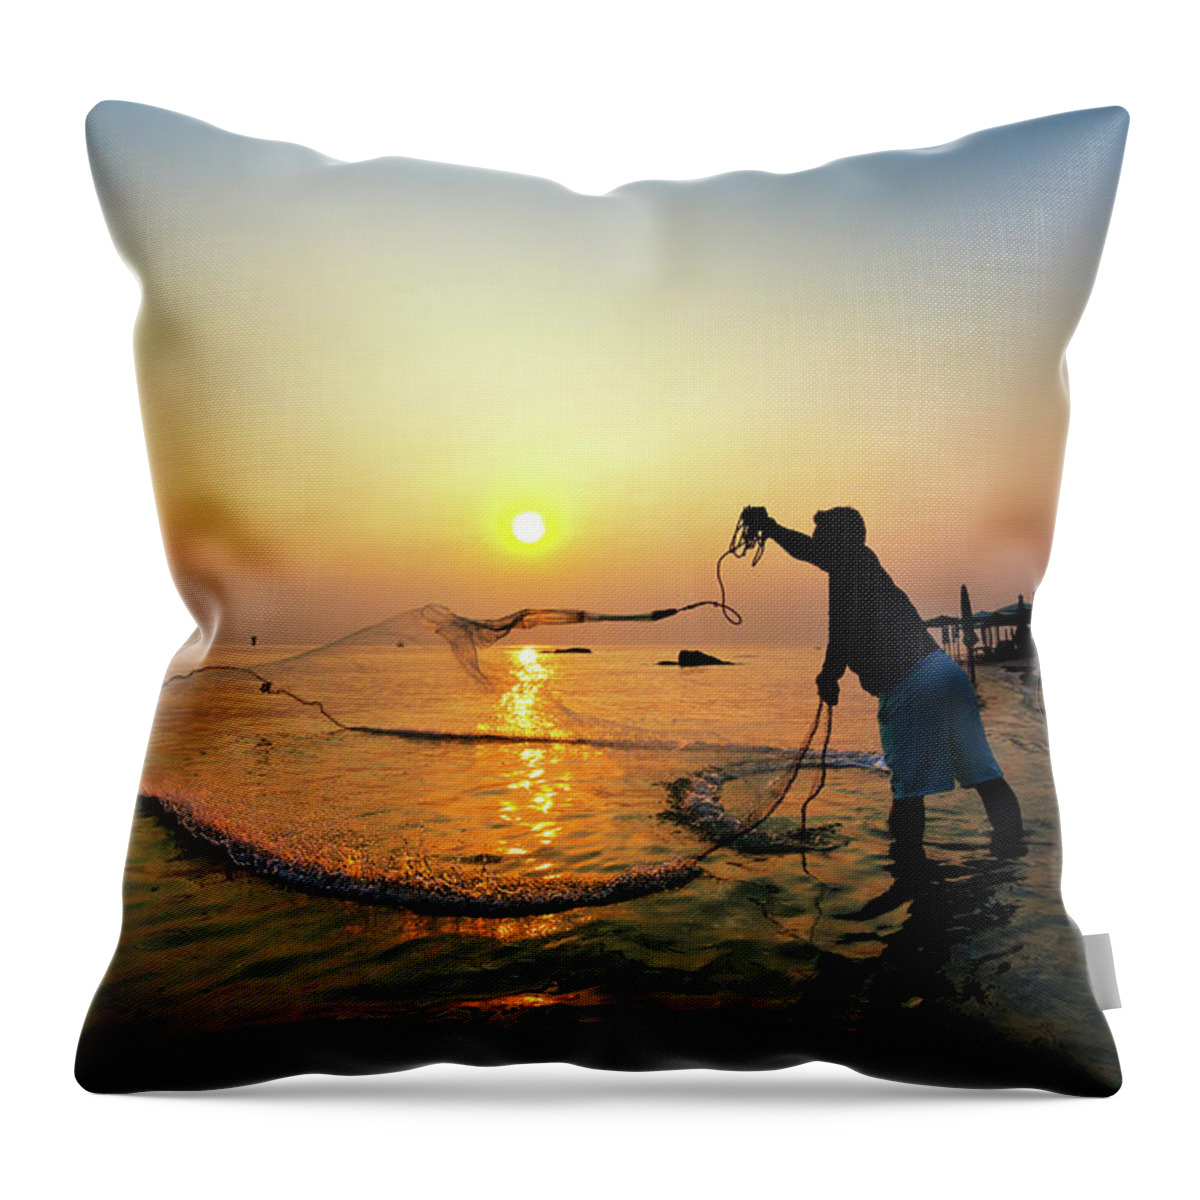 People Throw Pillow featuring the photograph Fisherman Catching A Fish by Monthon Wa